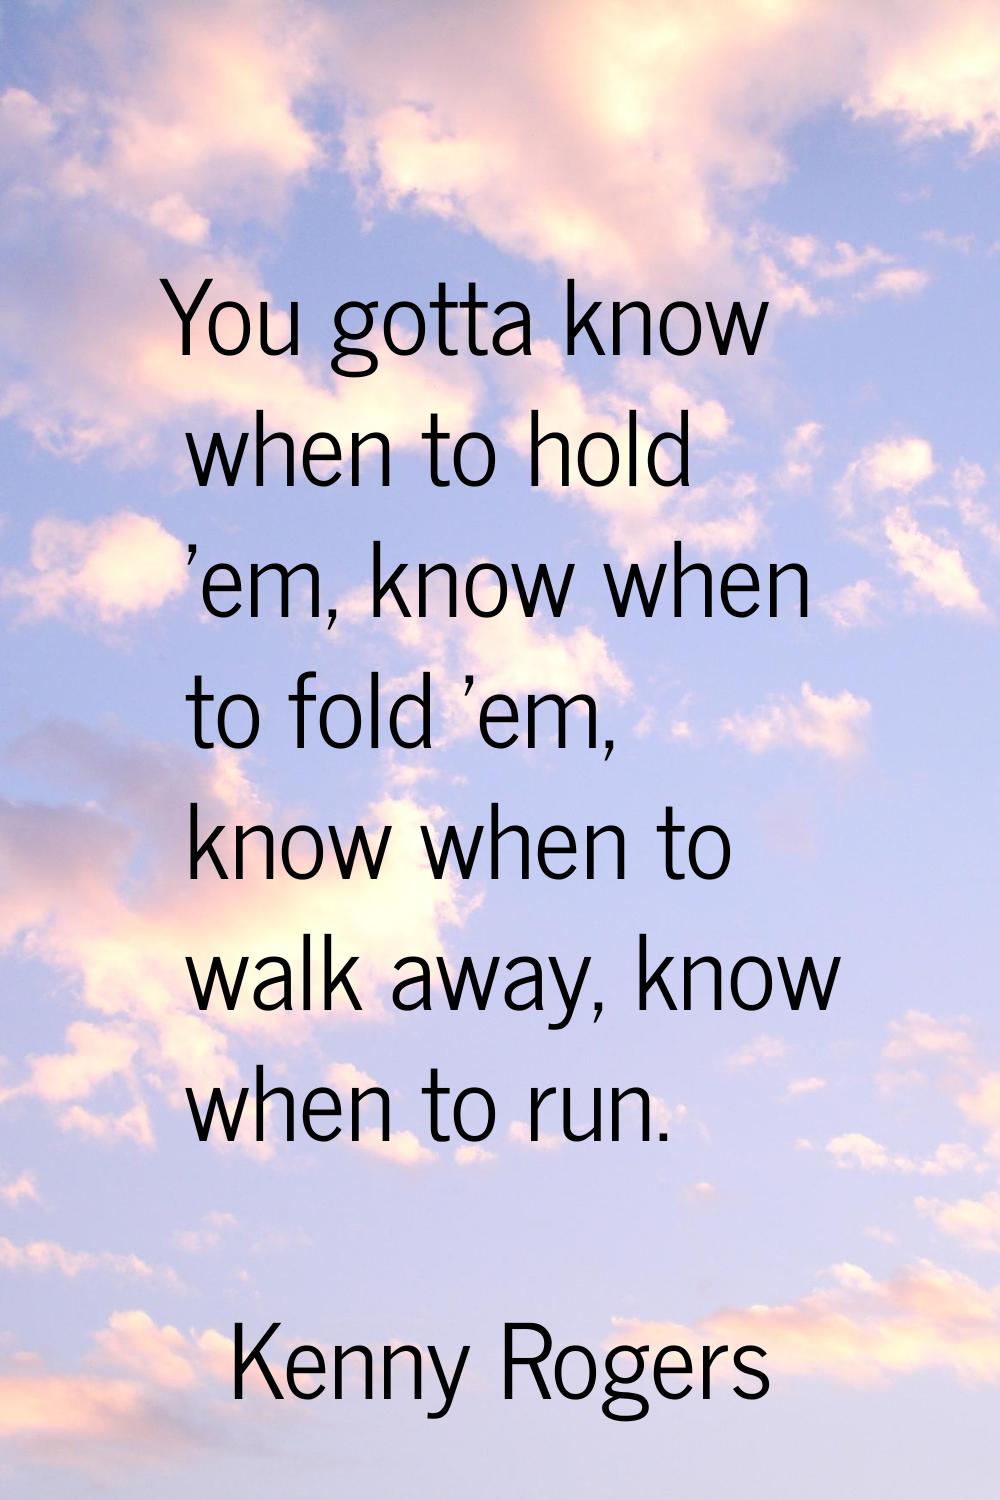 You gotta know when to hold 'em, know when to fold 'em, know when to walk away, know when to run.